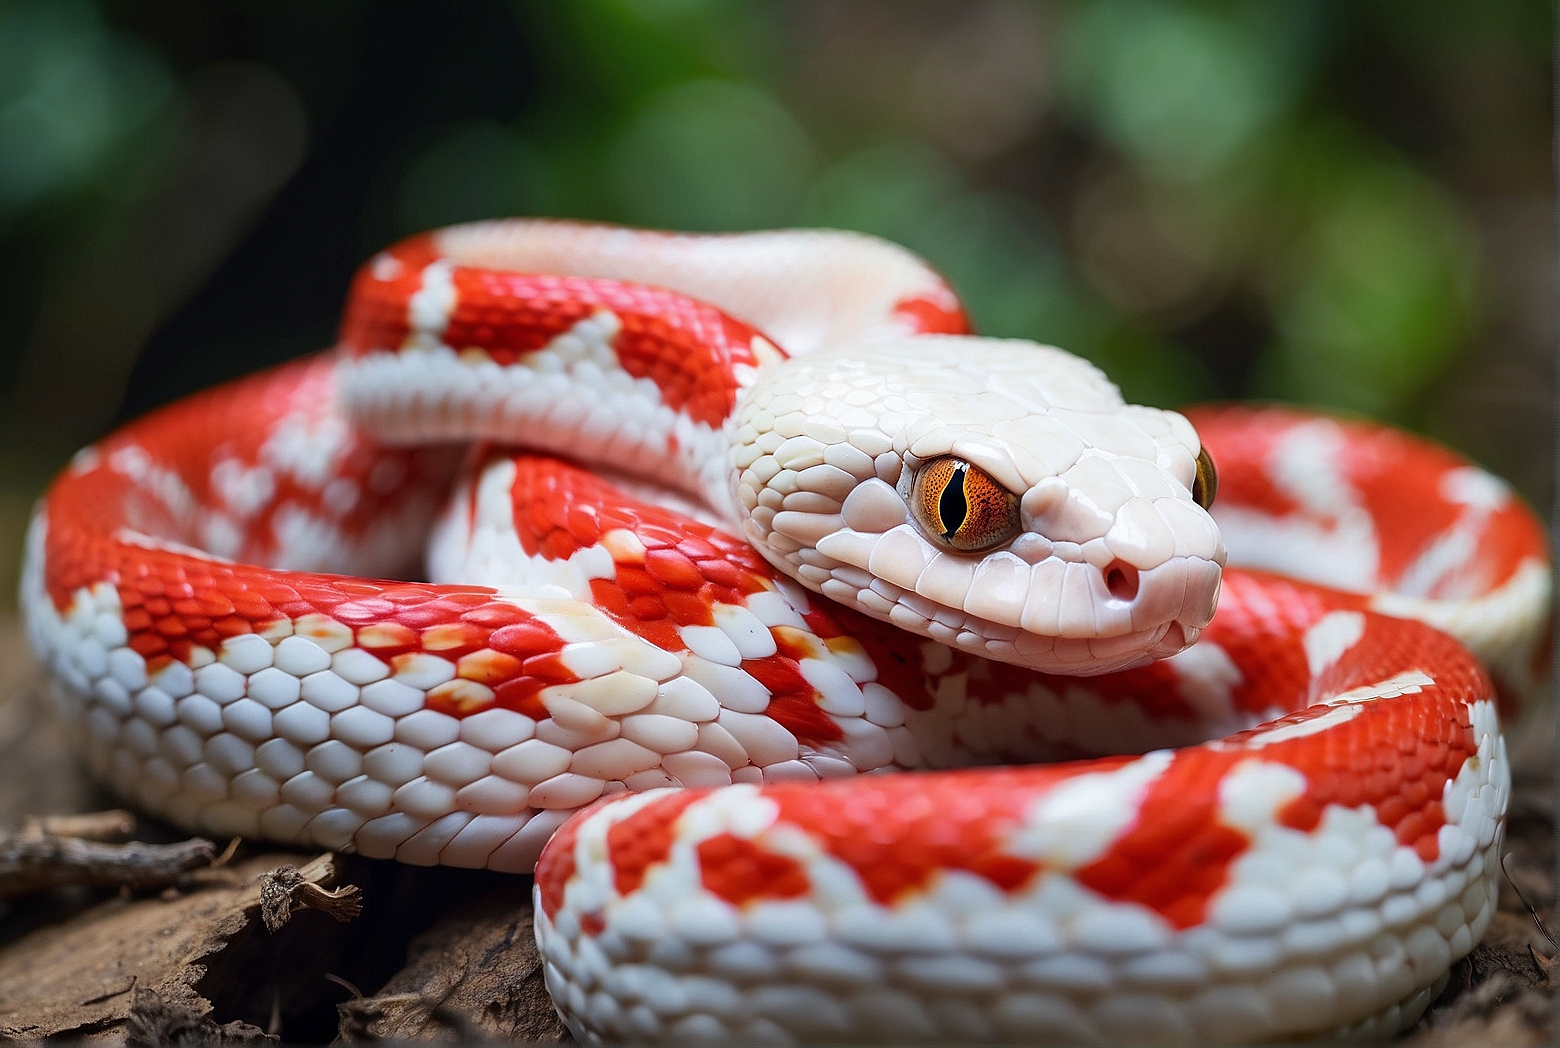 How to Determine the Price of an Albino Corn Snake